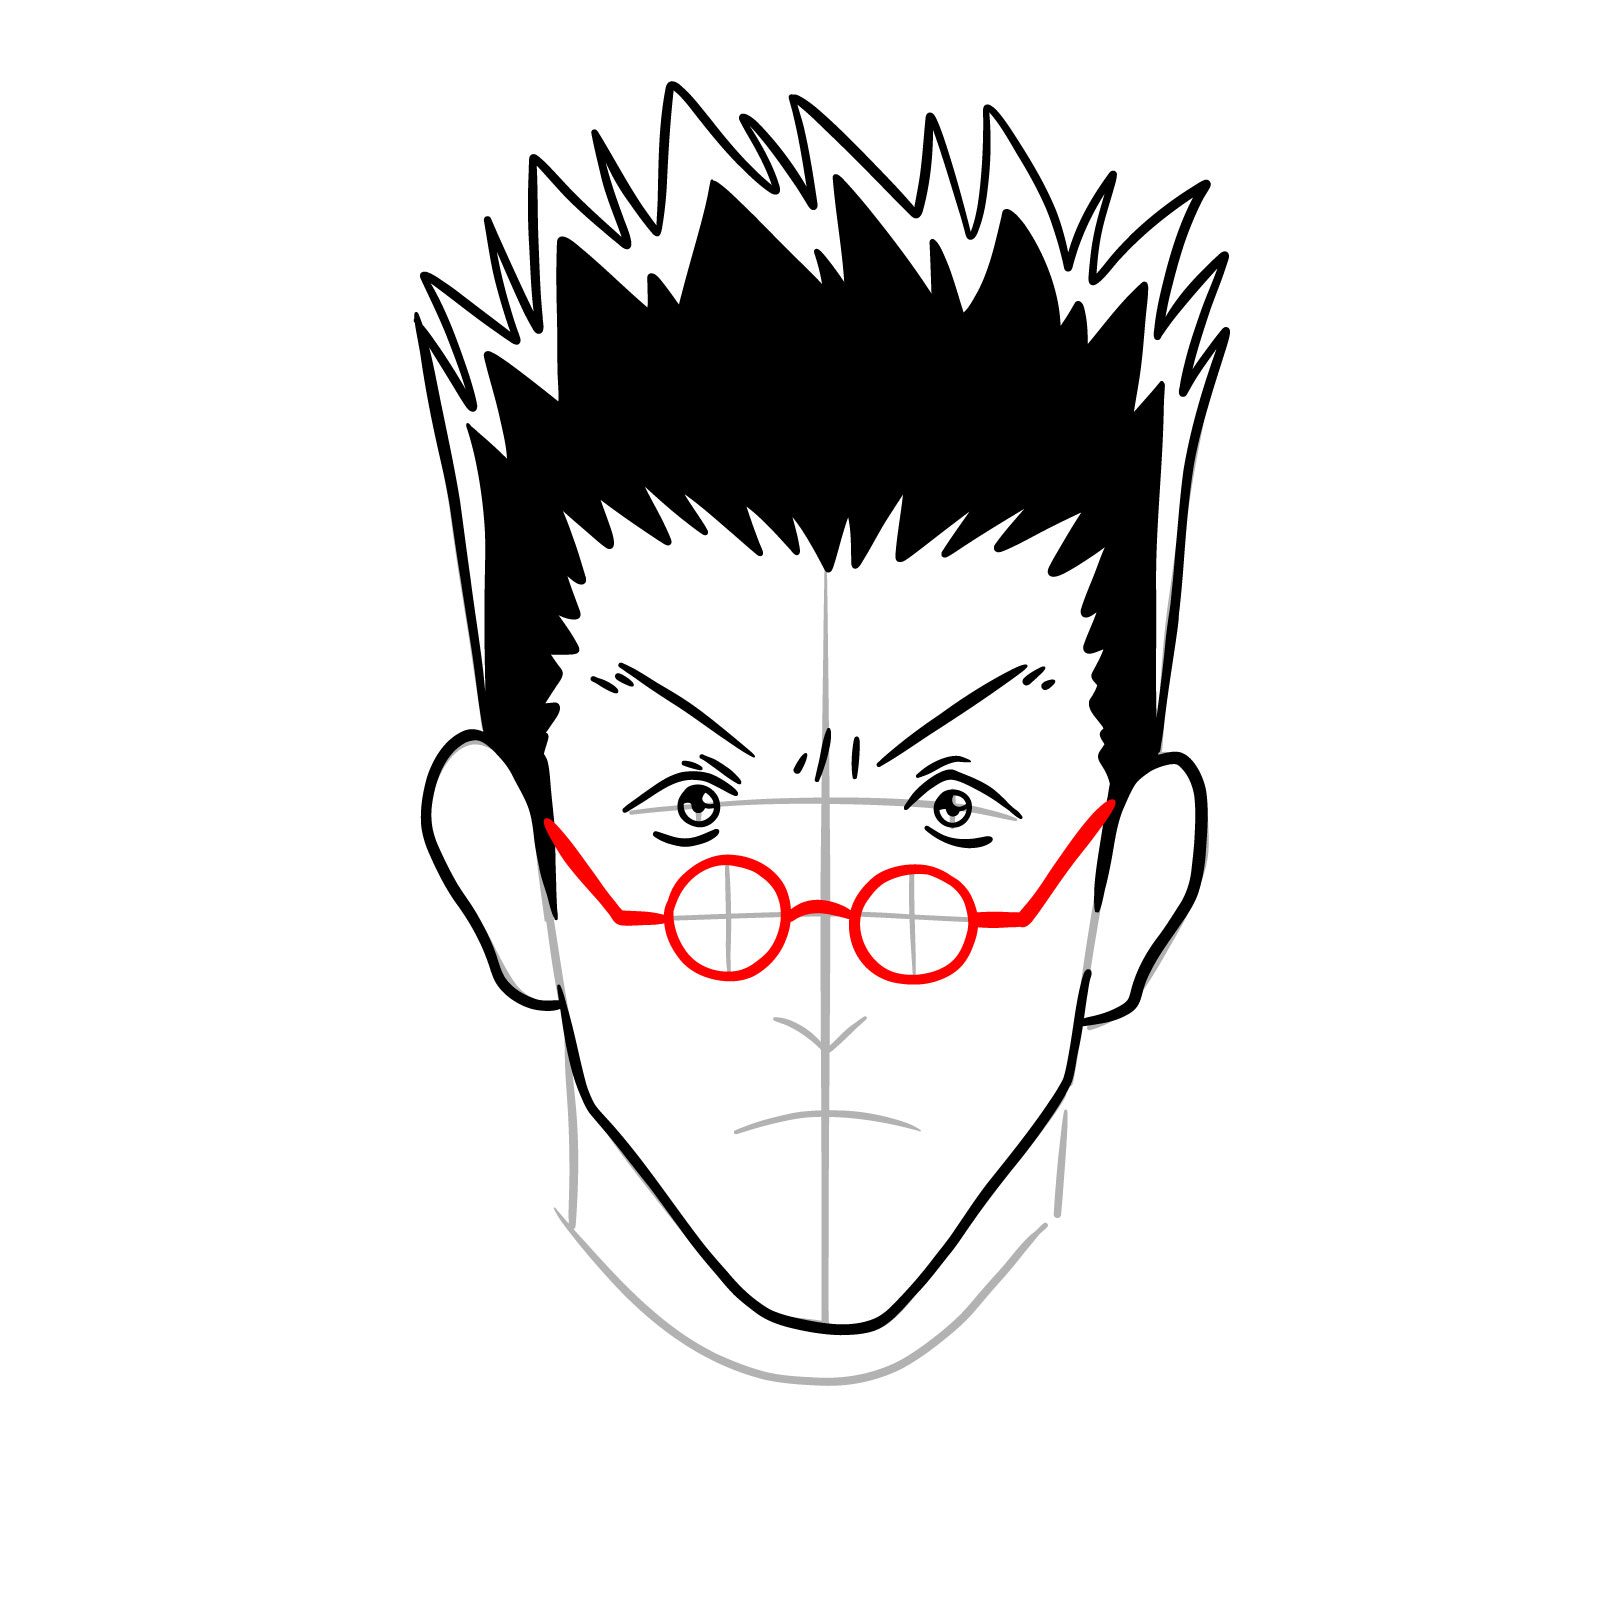 How to draw Leorio's face - Hunter x Hunter - step 13